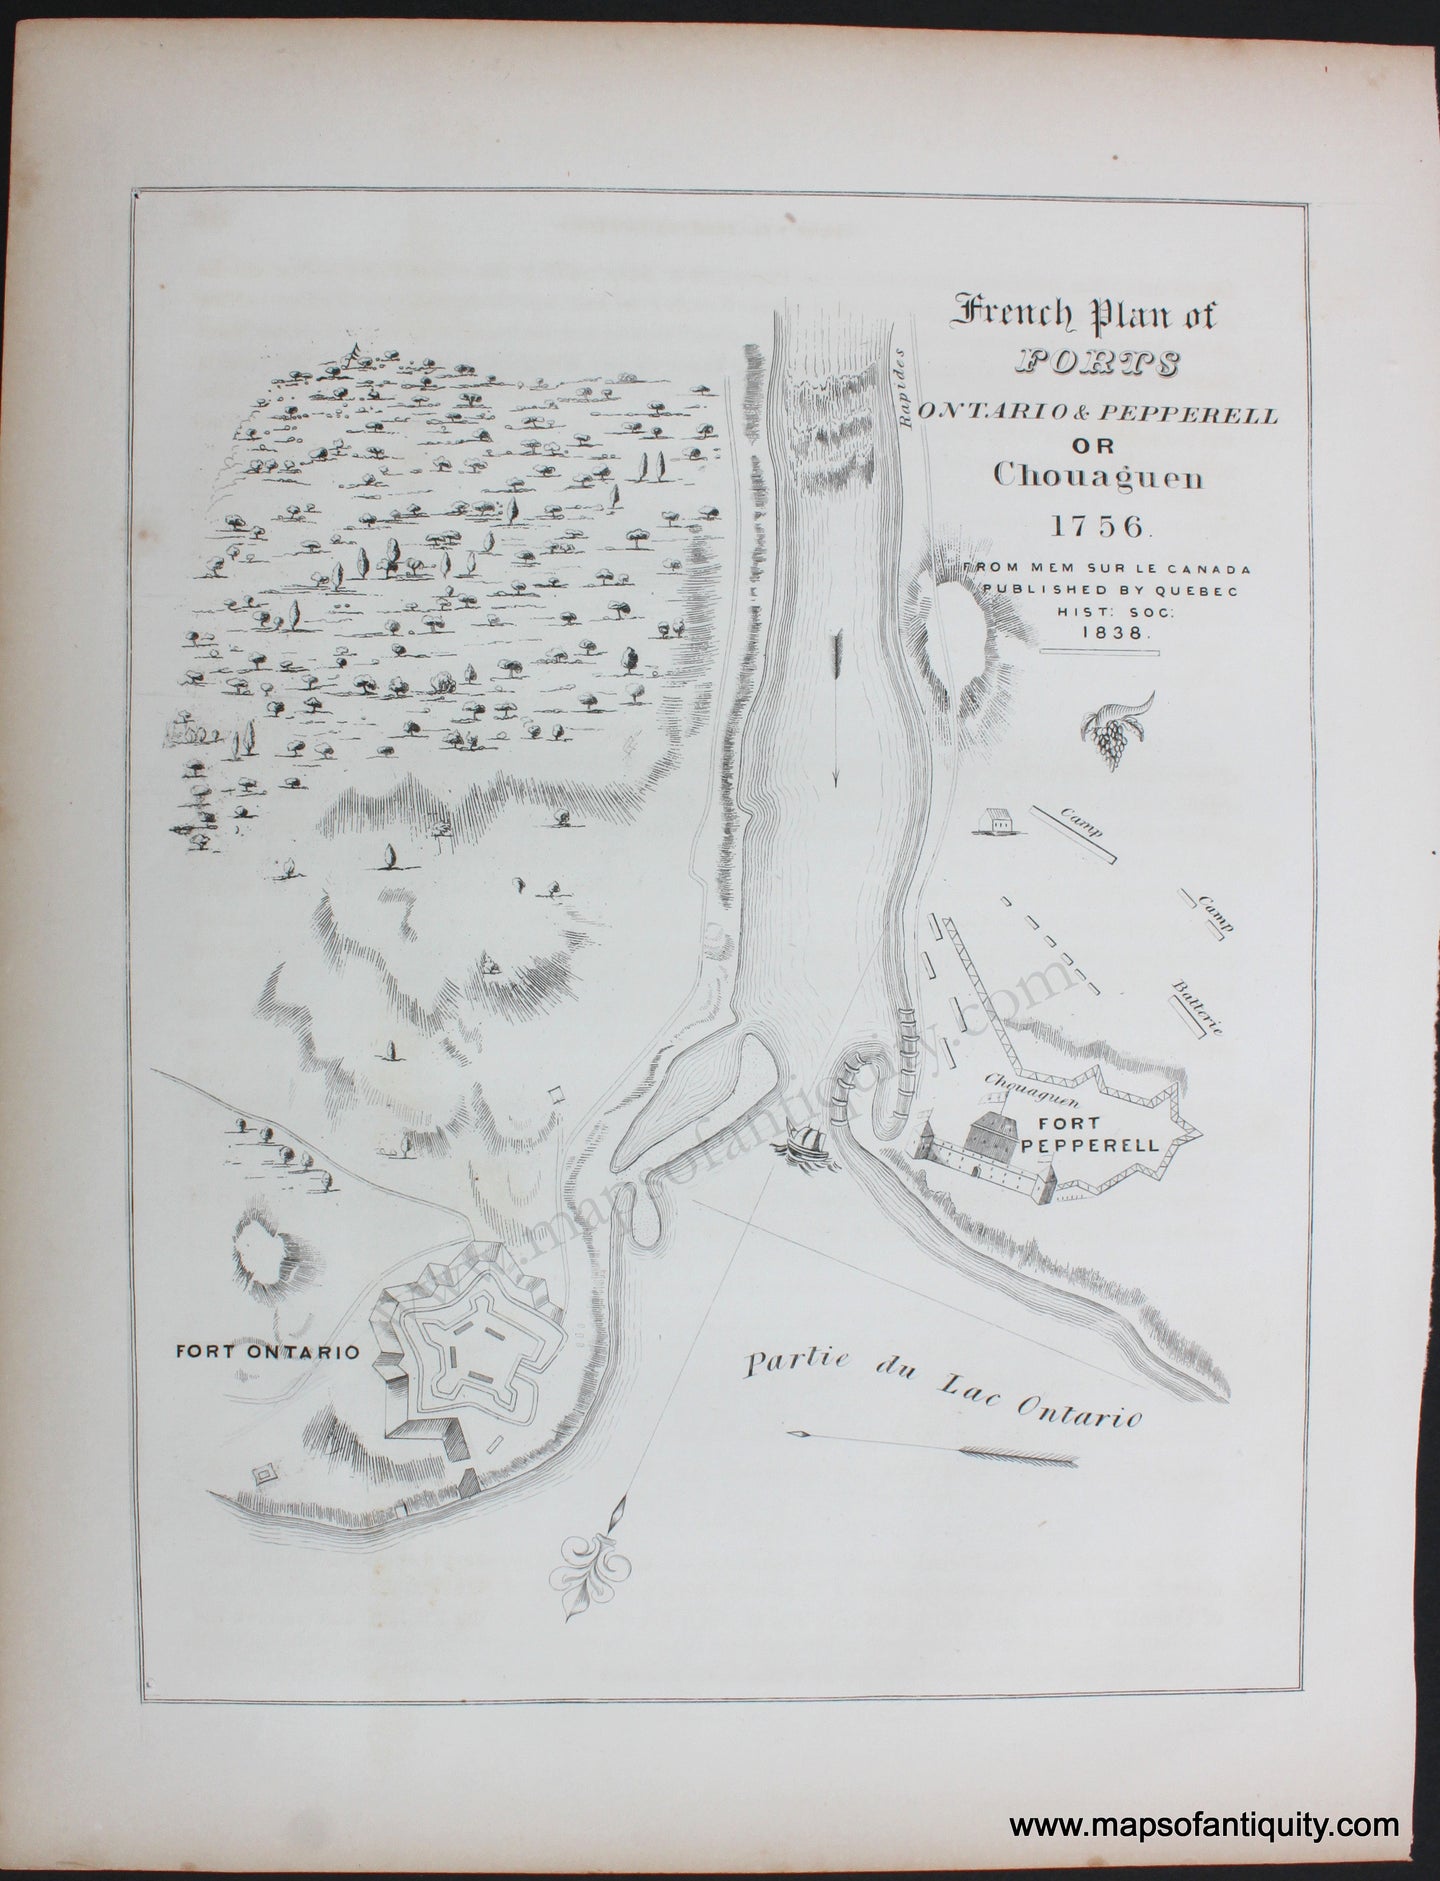 Genuine-Antique-Map-French-Plan-of-Forts-Ontario-&-Pepperell-or-Chouaguen-1756-1850-Documentary-History-of-the-State-of-New-York-Maps-Of-Antiquity